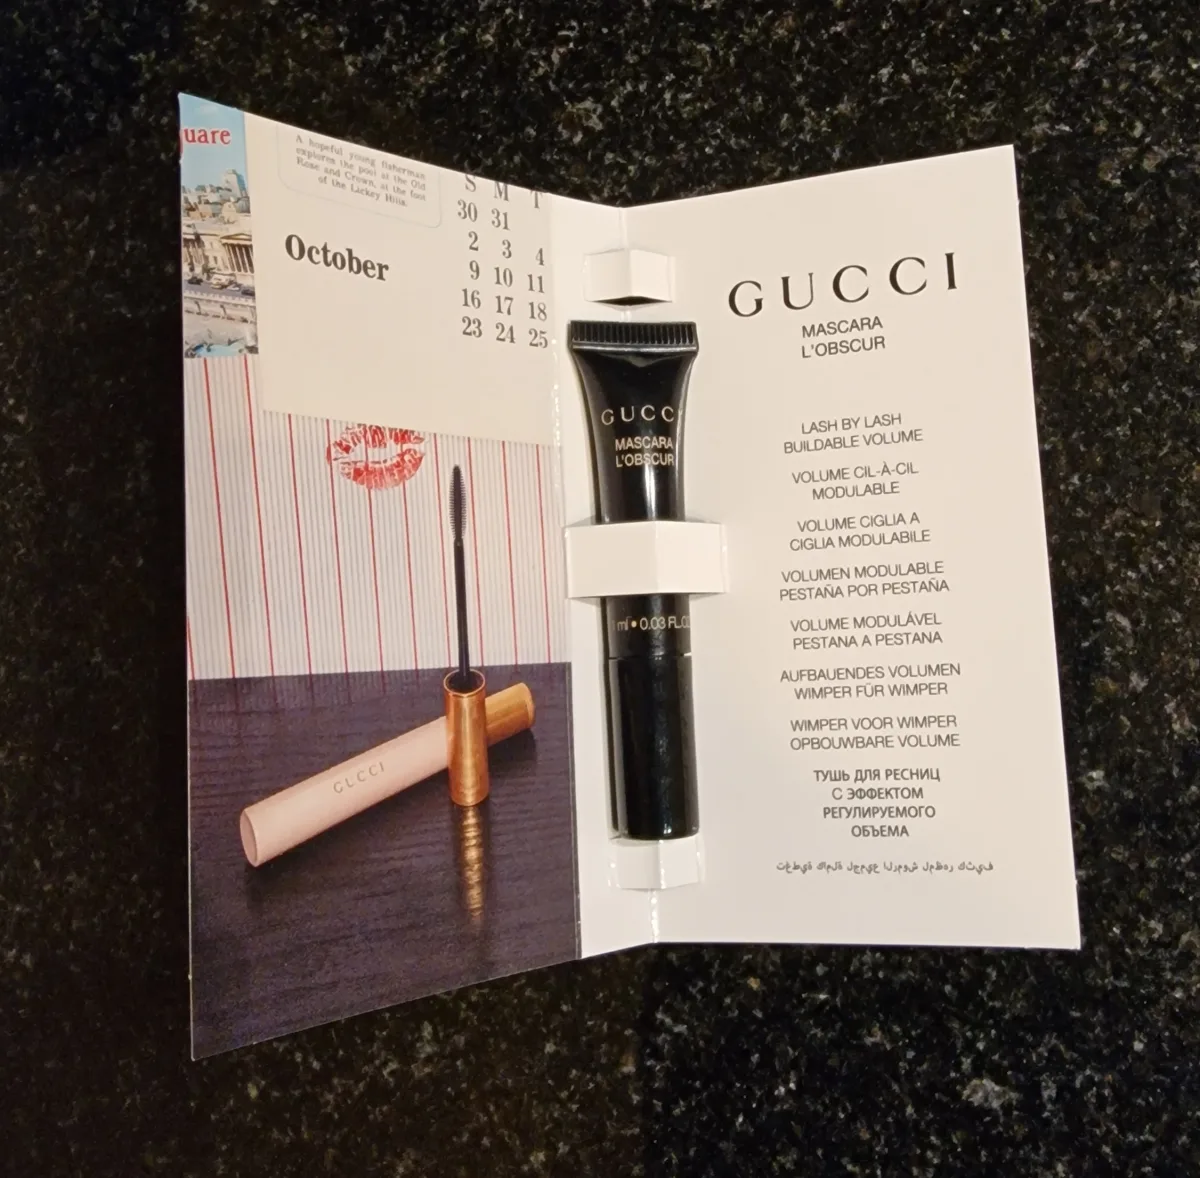 Gucci Beauty Mascara L'Obscur - before review image